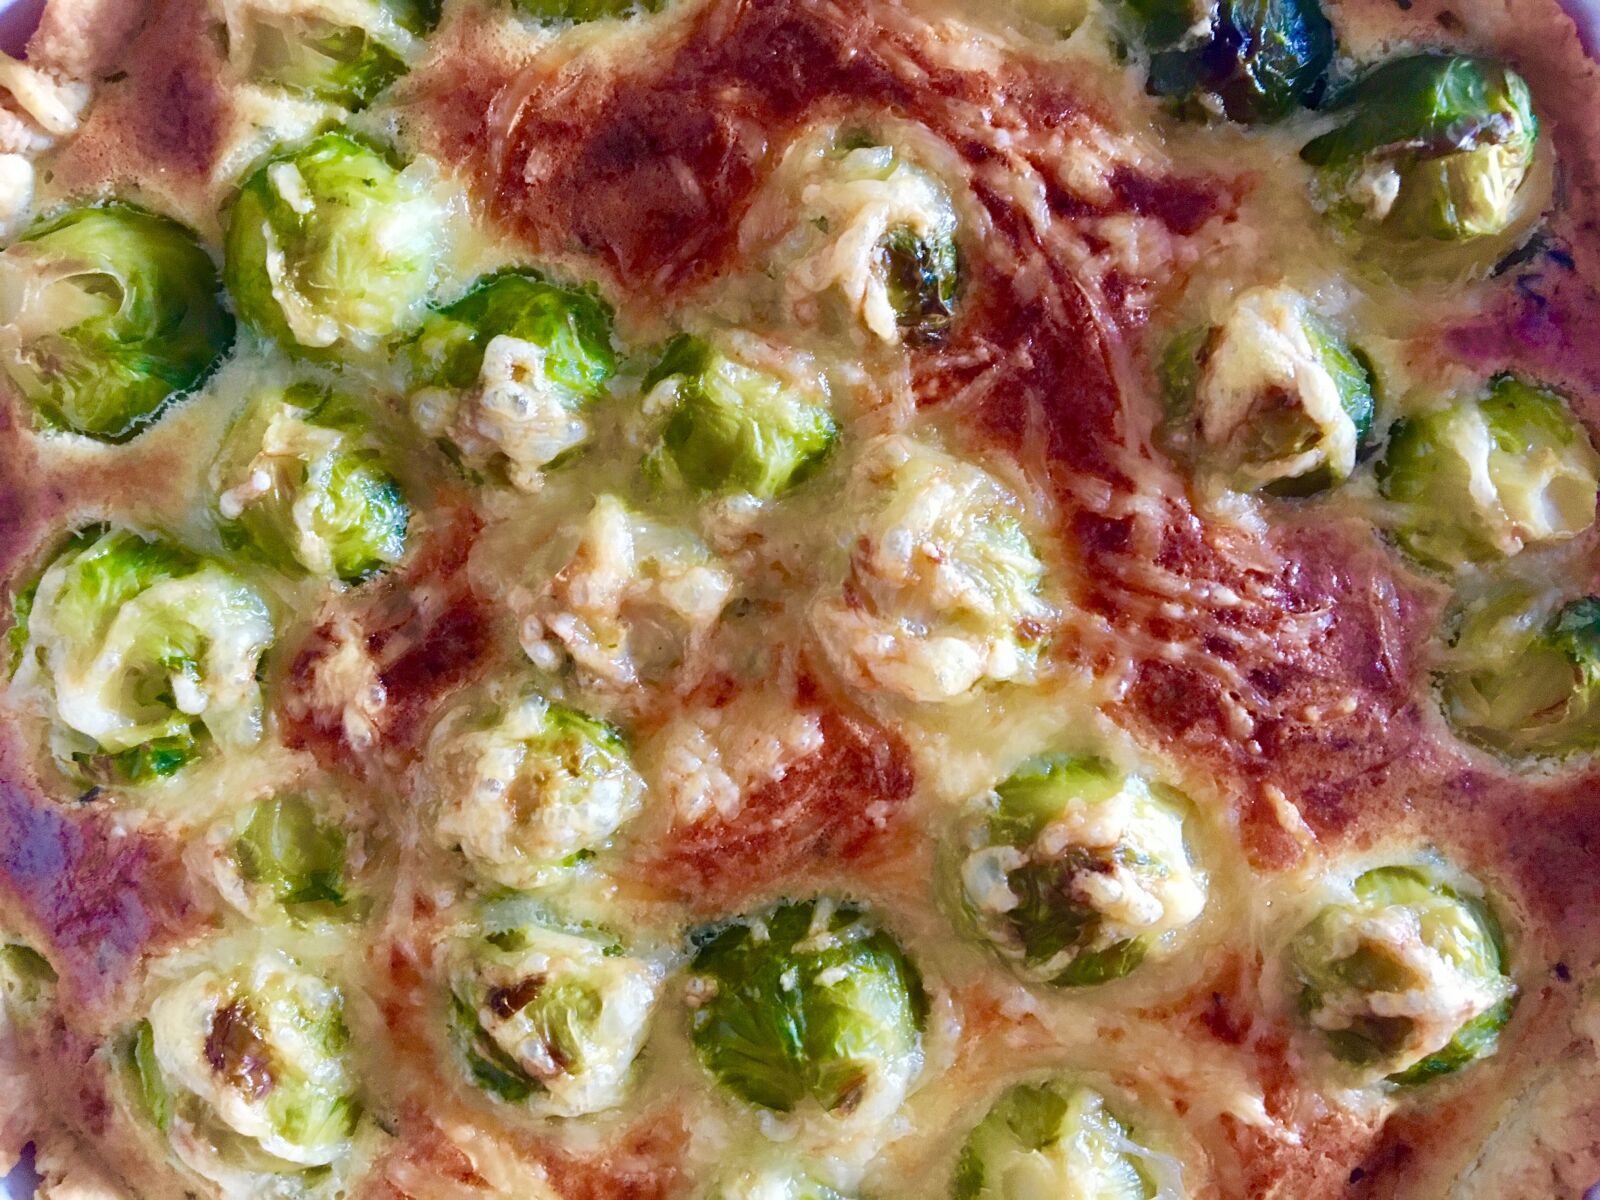 Apple iPhone 6s sample photo. Brussels sprouts, eat, casserole photography